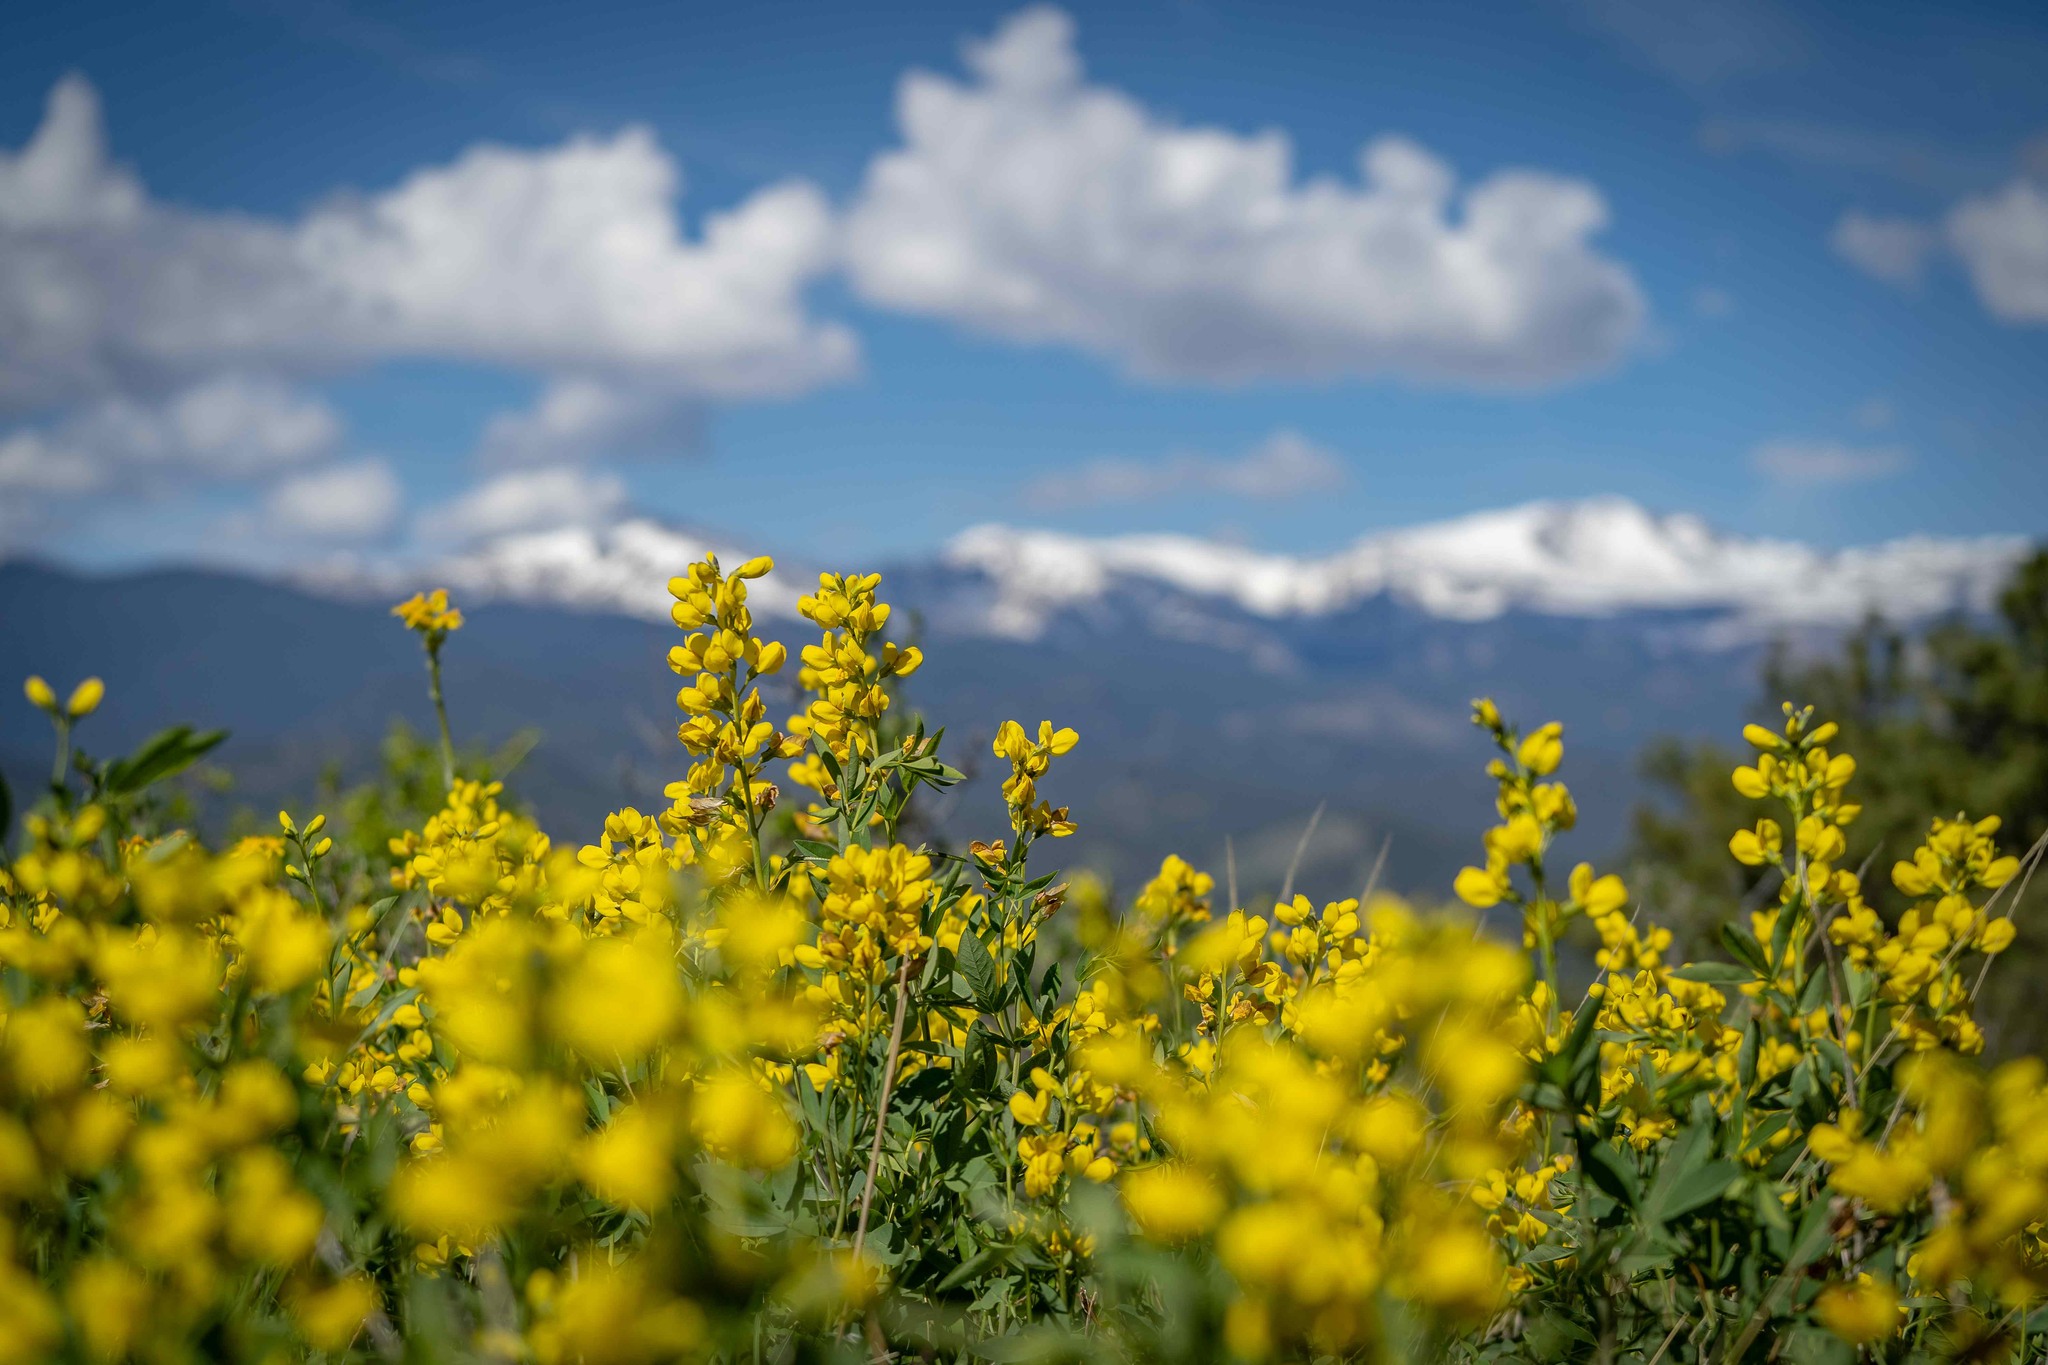 Beautiful wild yellow flowers in front of a mountain view with blue skies.